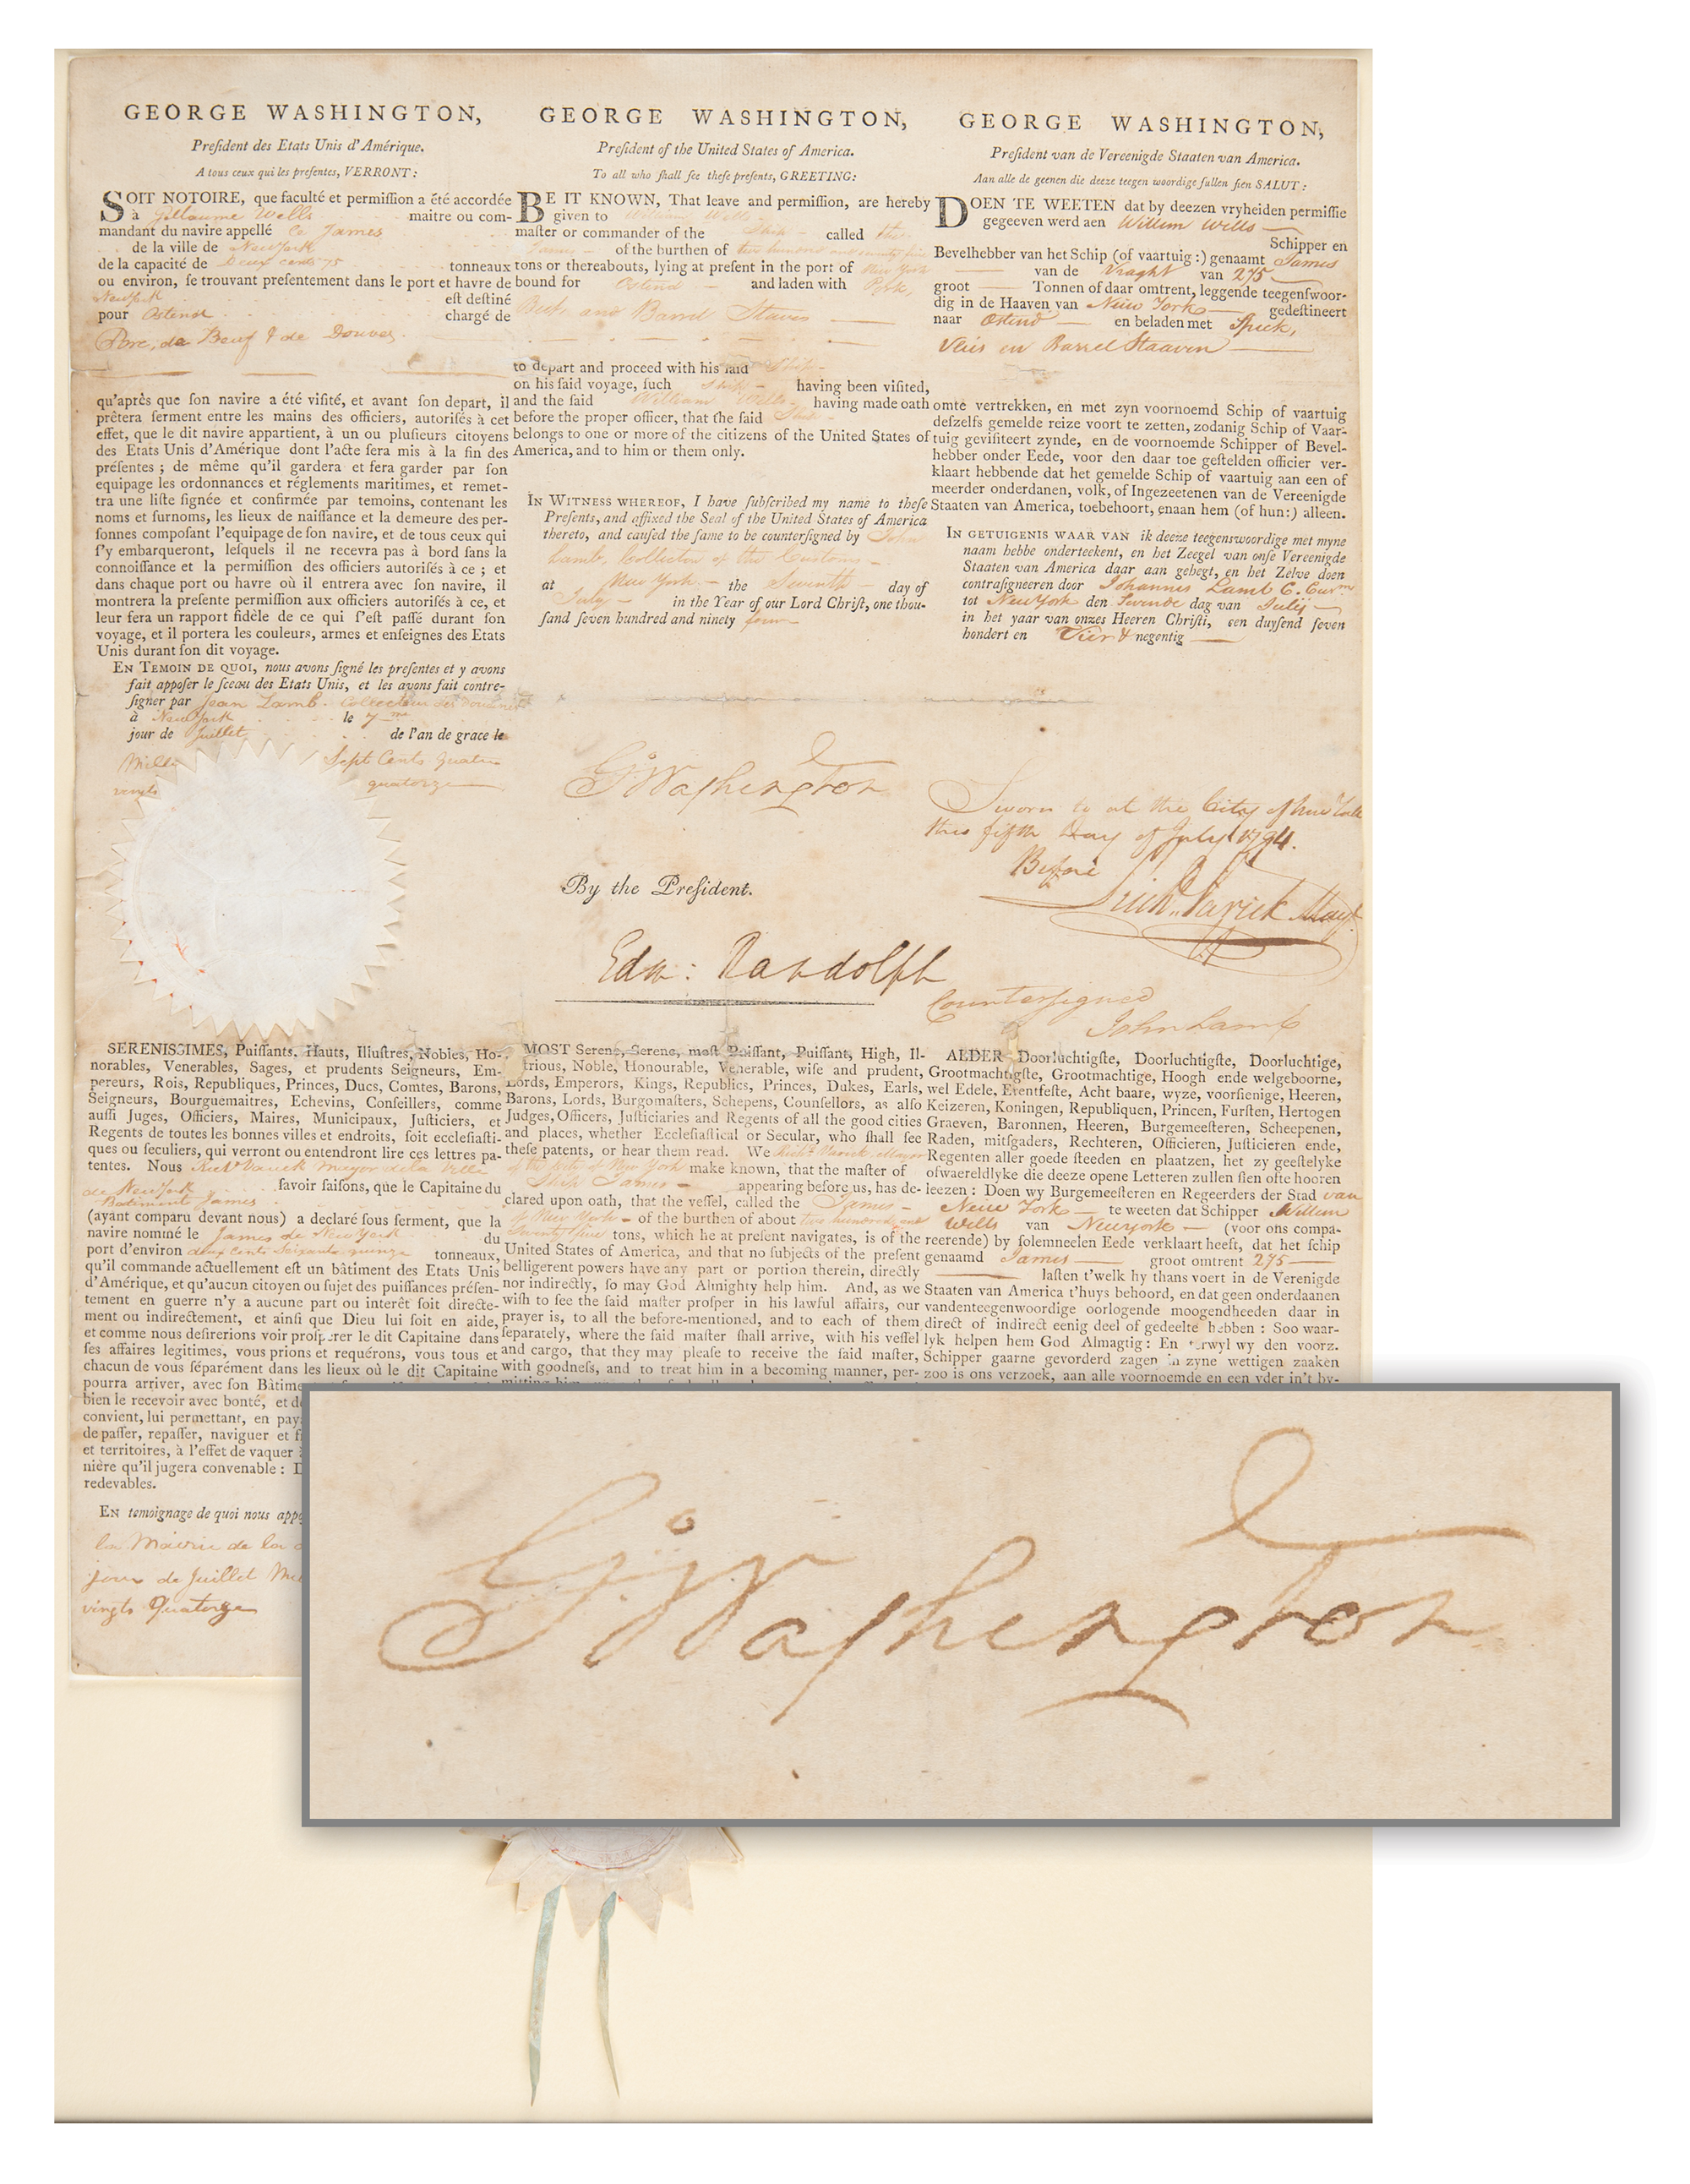 Lot #1 George Washington Document Signed as President - Three-Language Ship's Papers for a Trade Voyage - Image 1